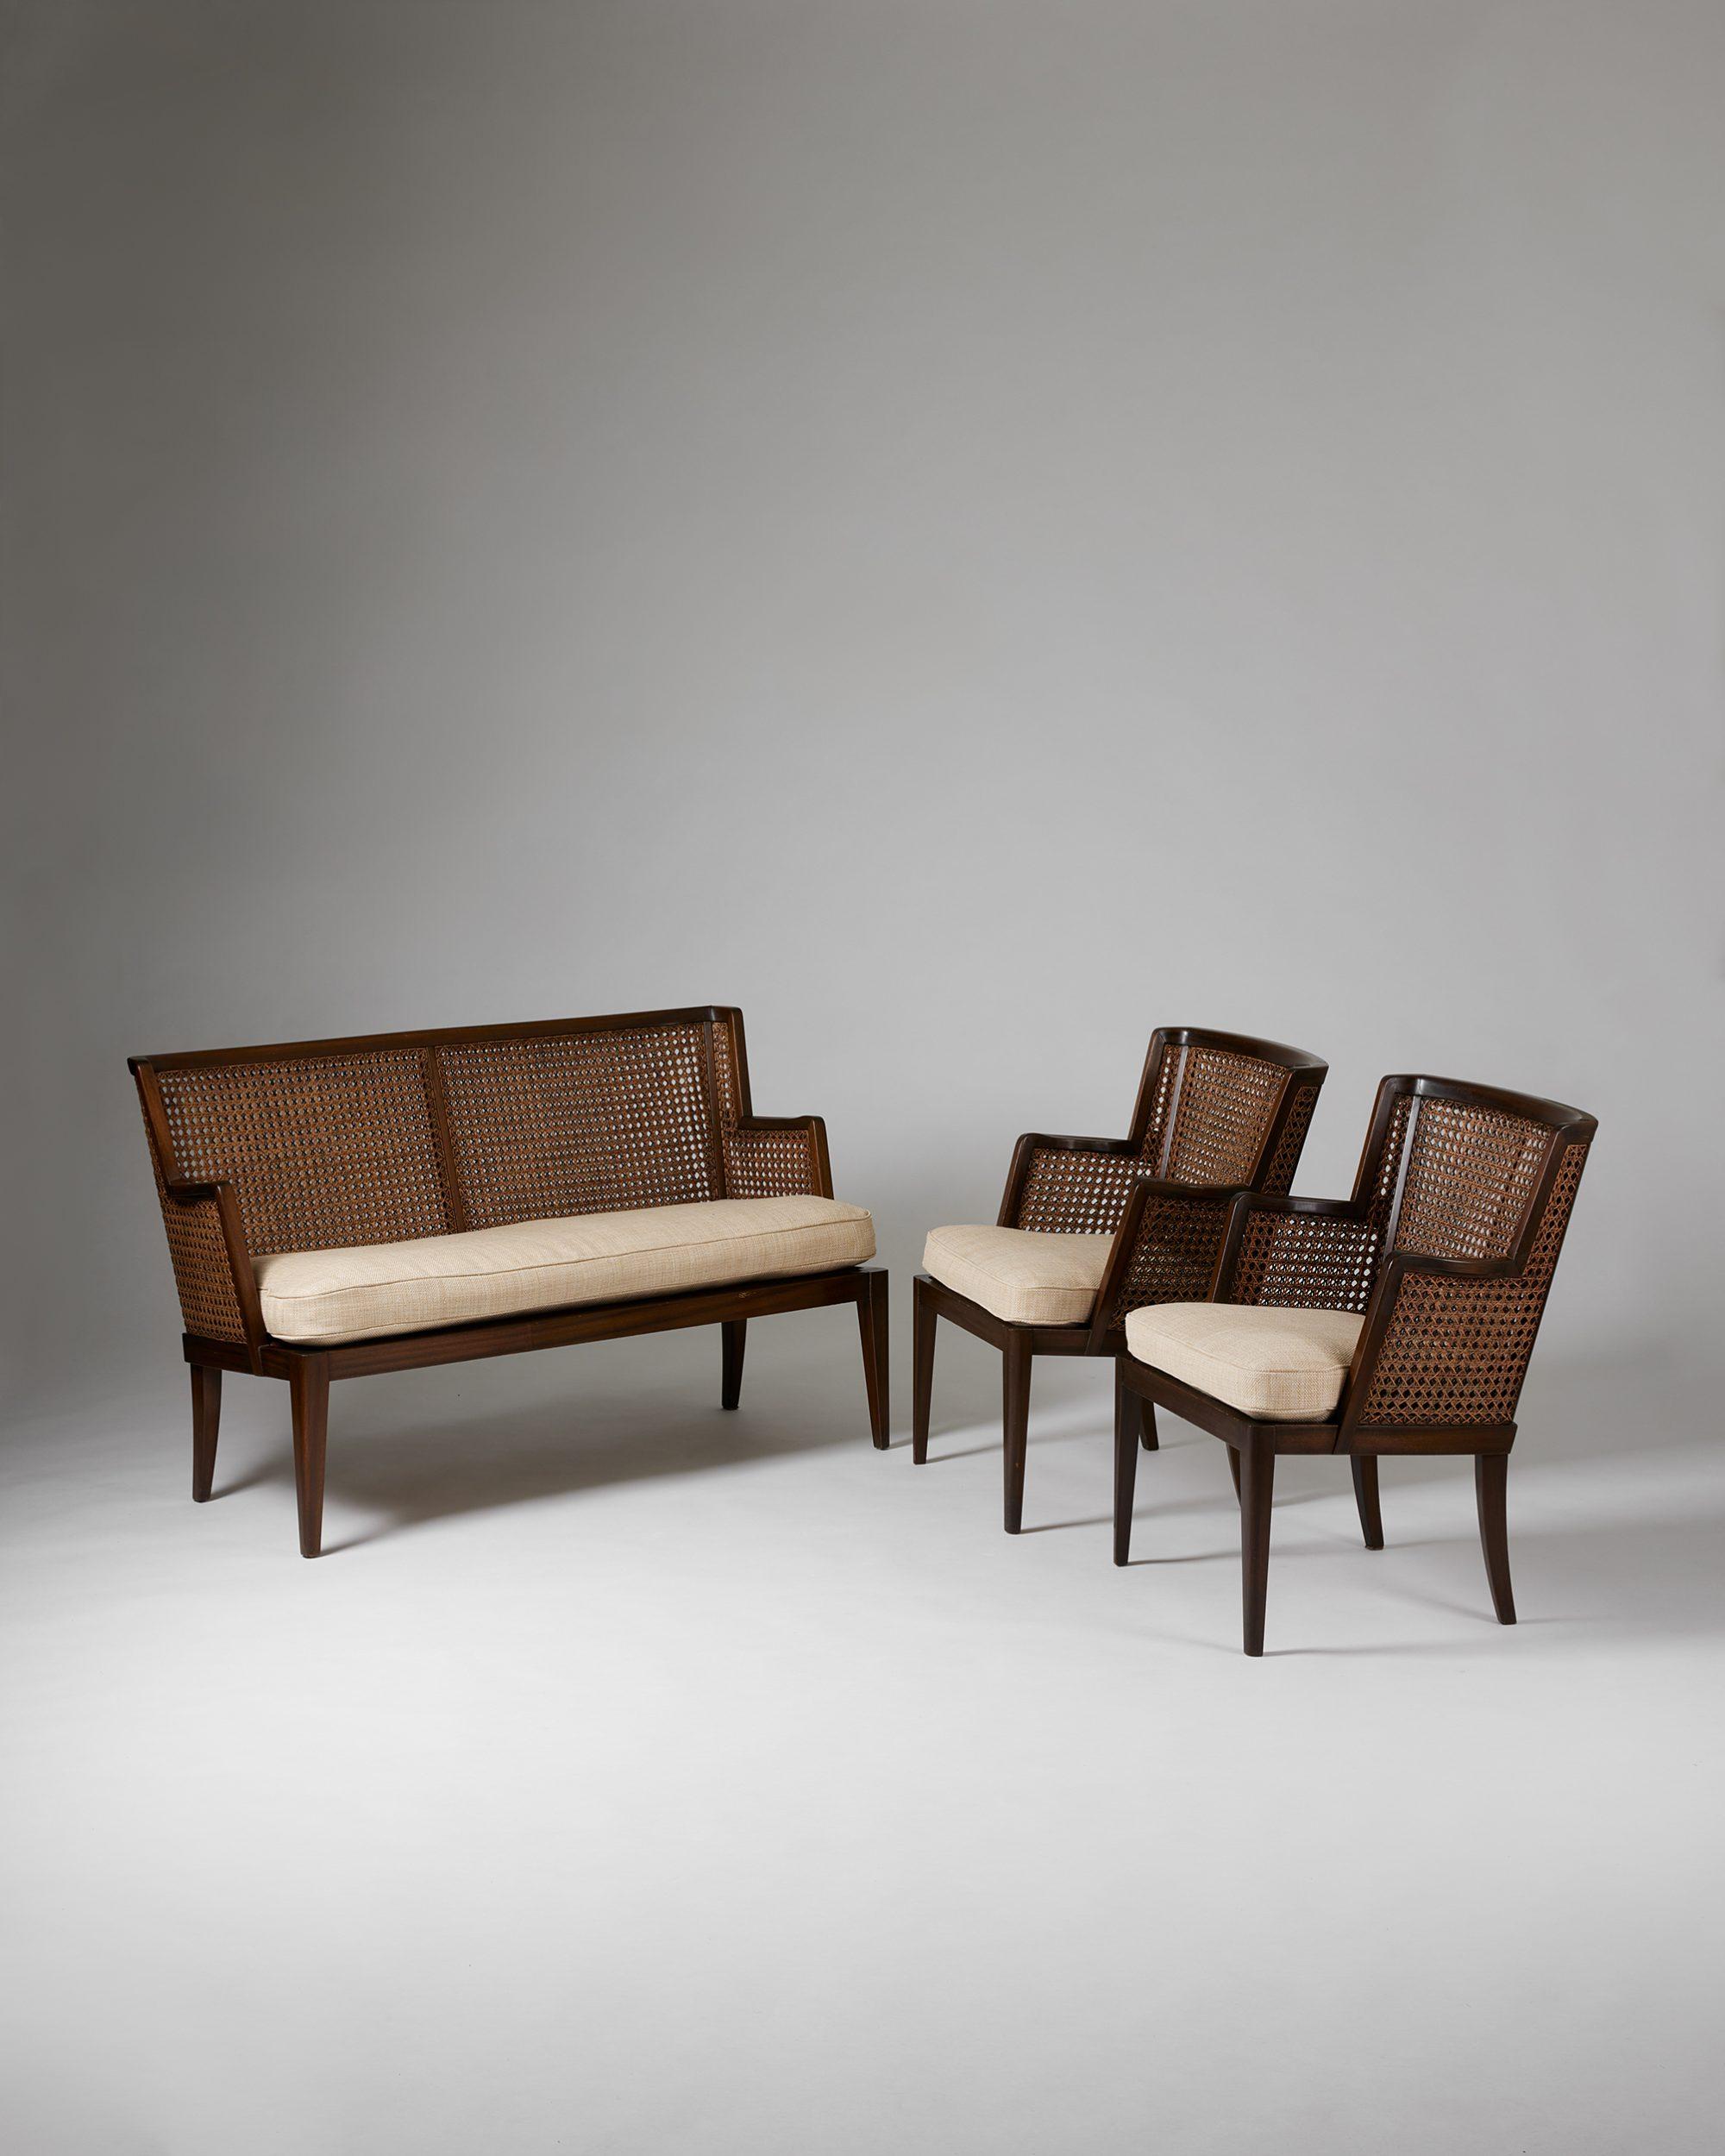 A pair of armchairs and sofa, anoynmous for Paul Boman,
Finland, 1930s.

Stained birch and rattan, upholstered cushions.

Dimensions of the chairs:
H: 79 cm / 2' 7 1/4''
W: 60 cm / 23 3/4''
D: 65.5 cm / 2' 1 3/4''
SH: 43 cm / 17''

Dimensions of the